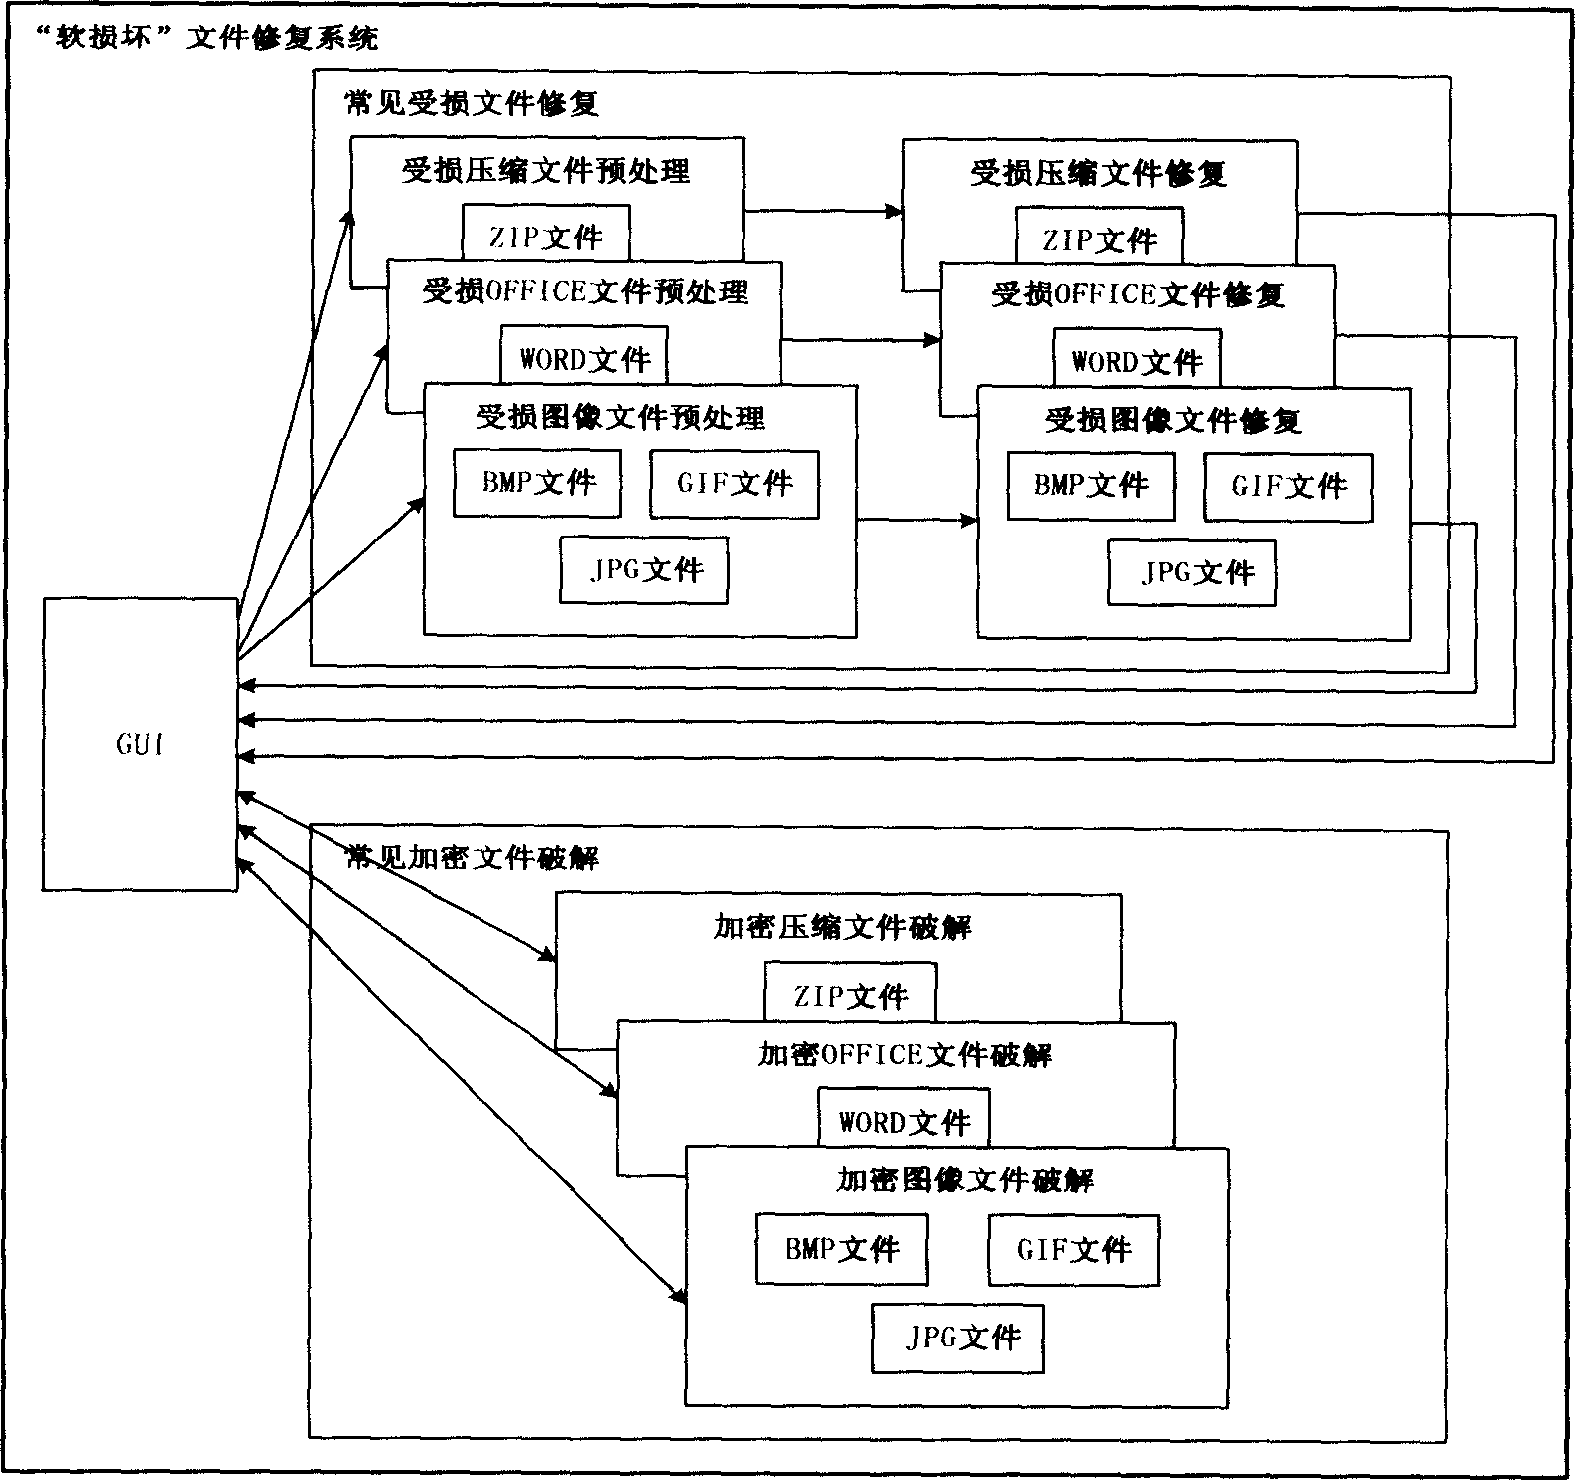 Data file restoration and password cracking system